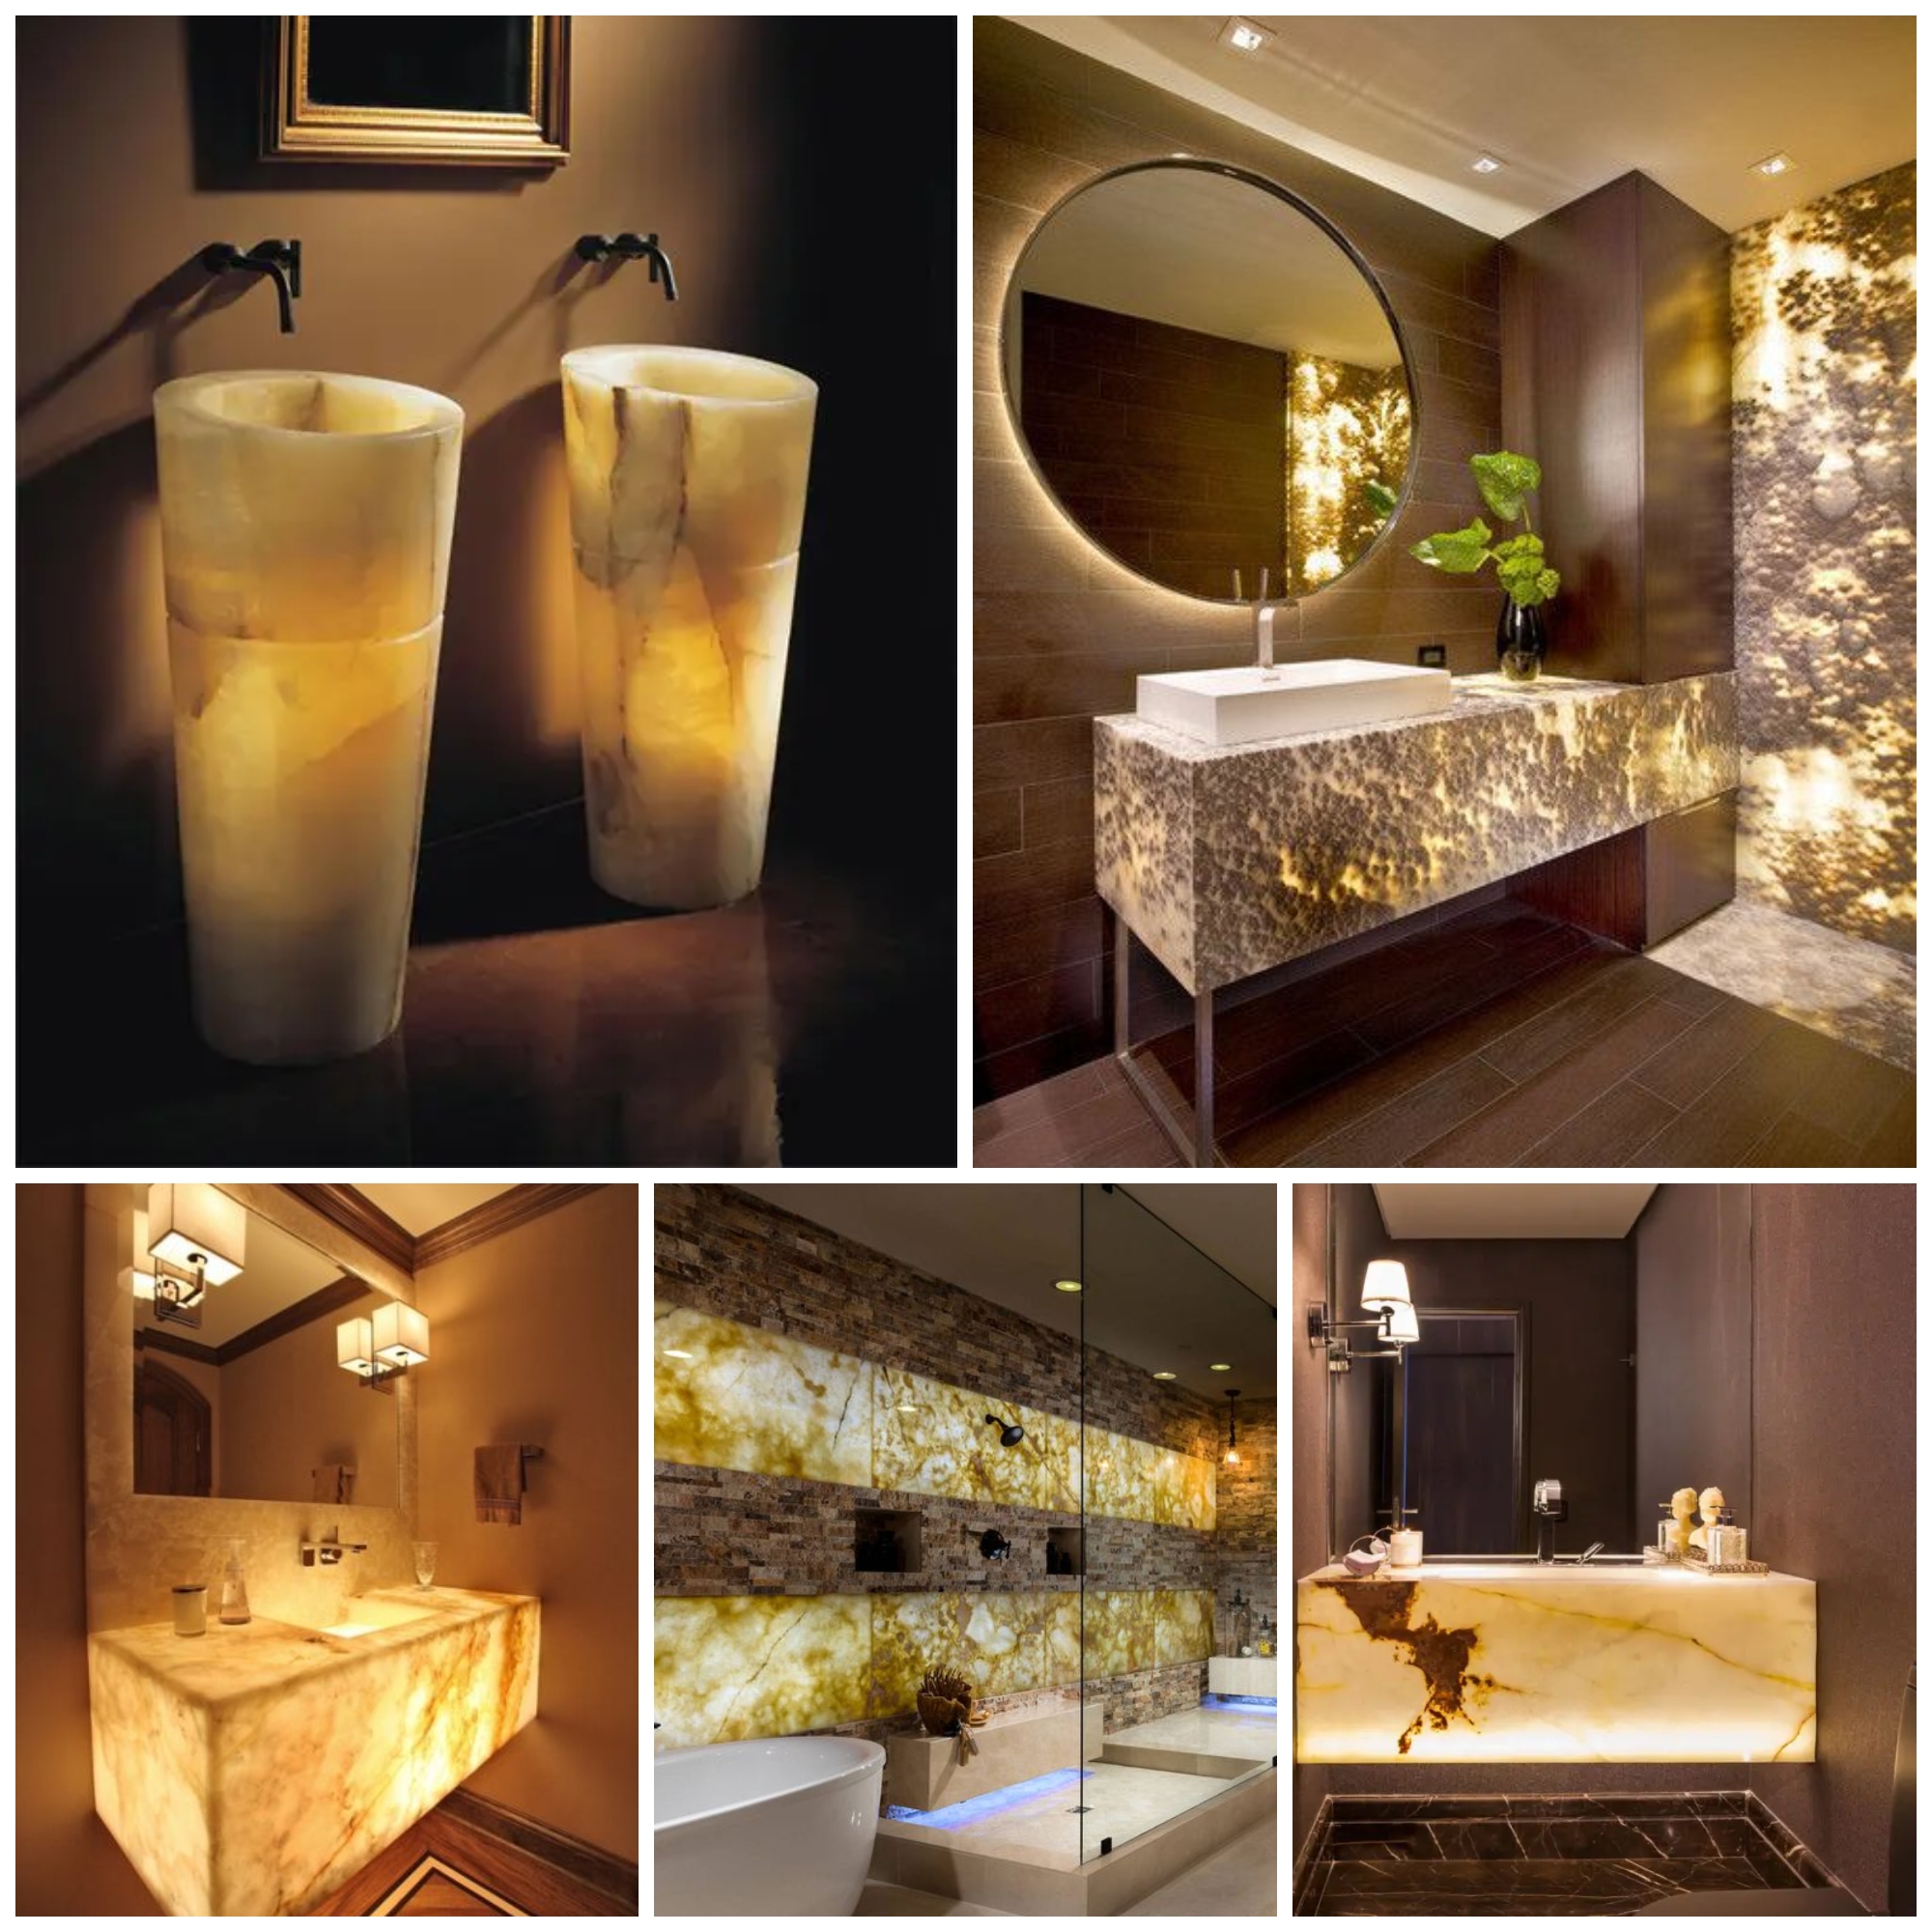 Onyx interior Design, Decor Ideas from Natural Stone Experts